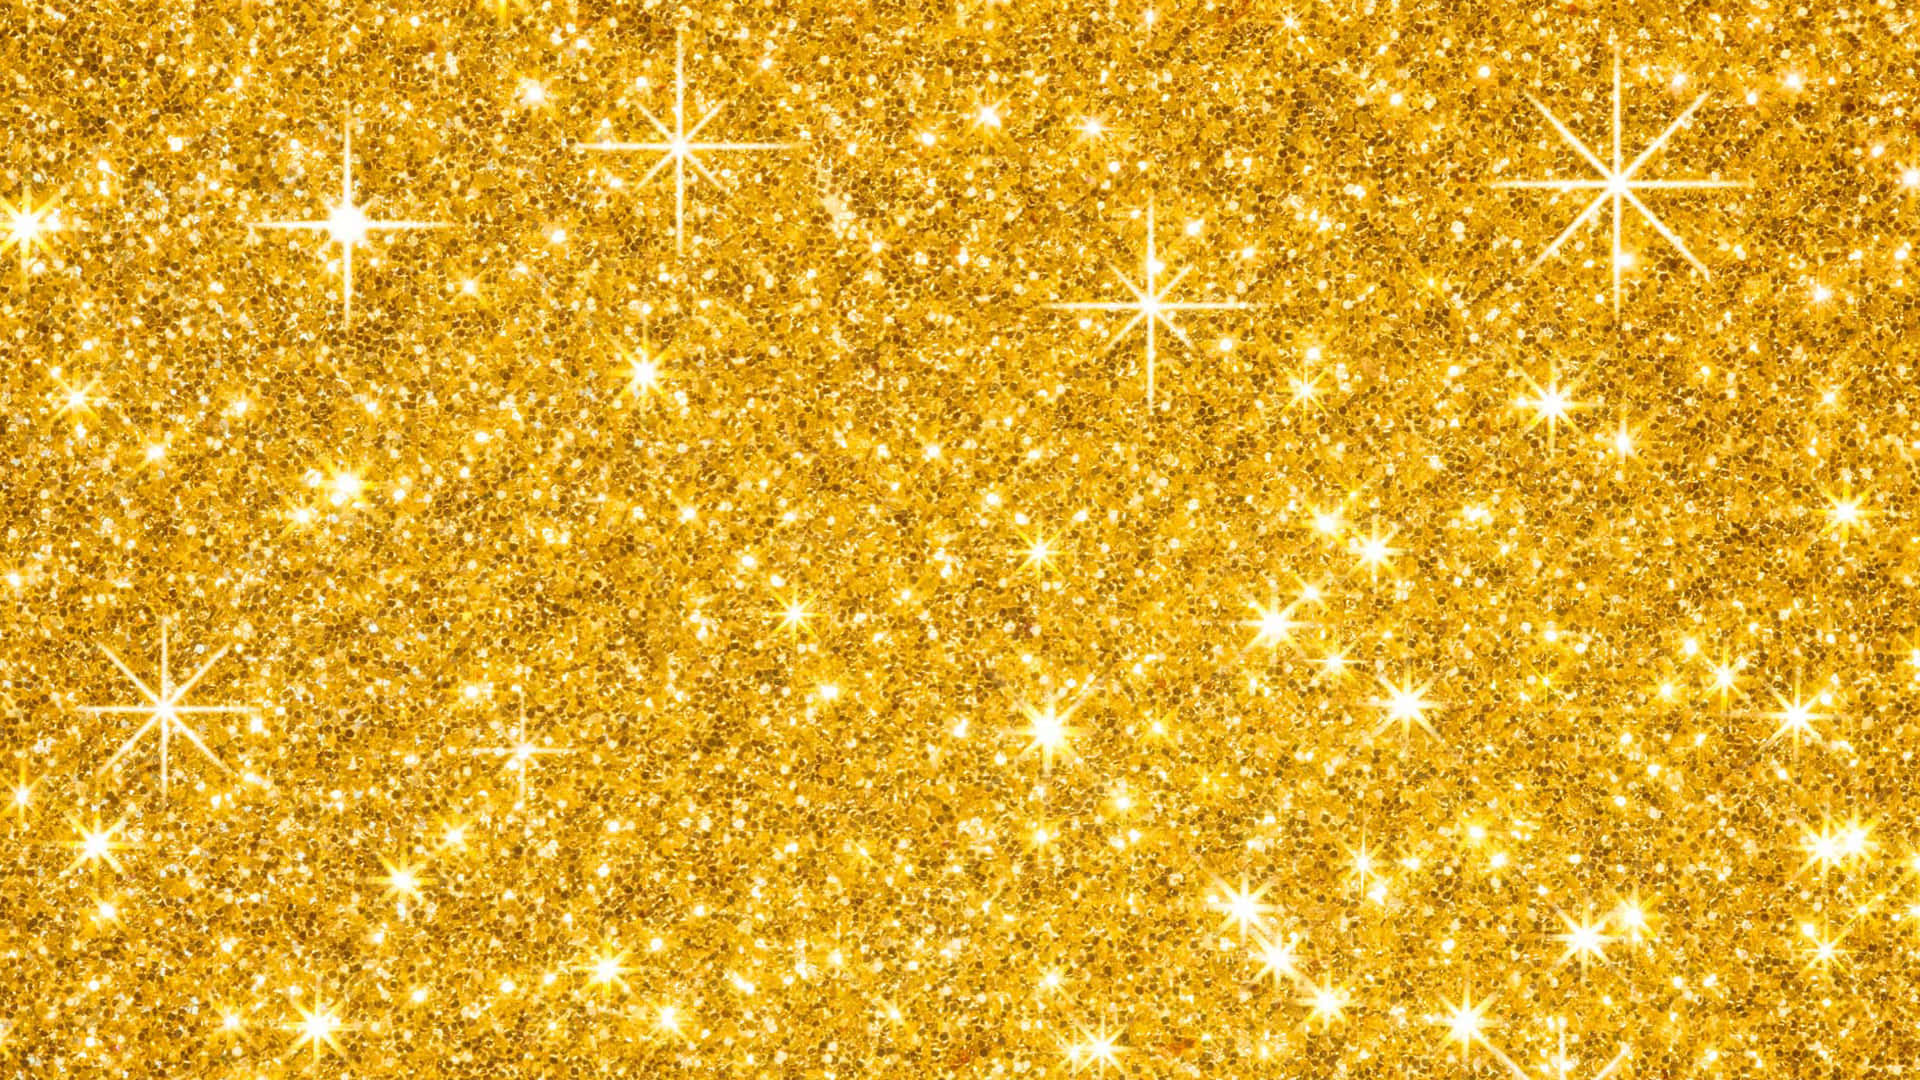 Celebrating a job well done with glimmering gold stars! Wallpaper